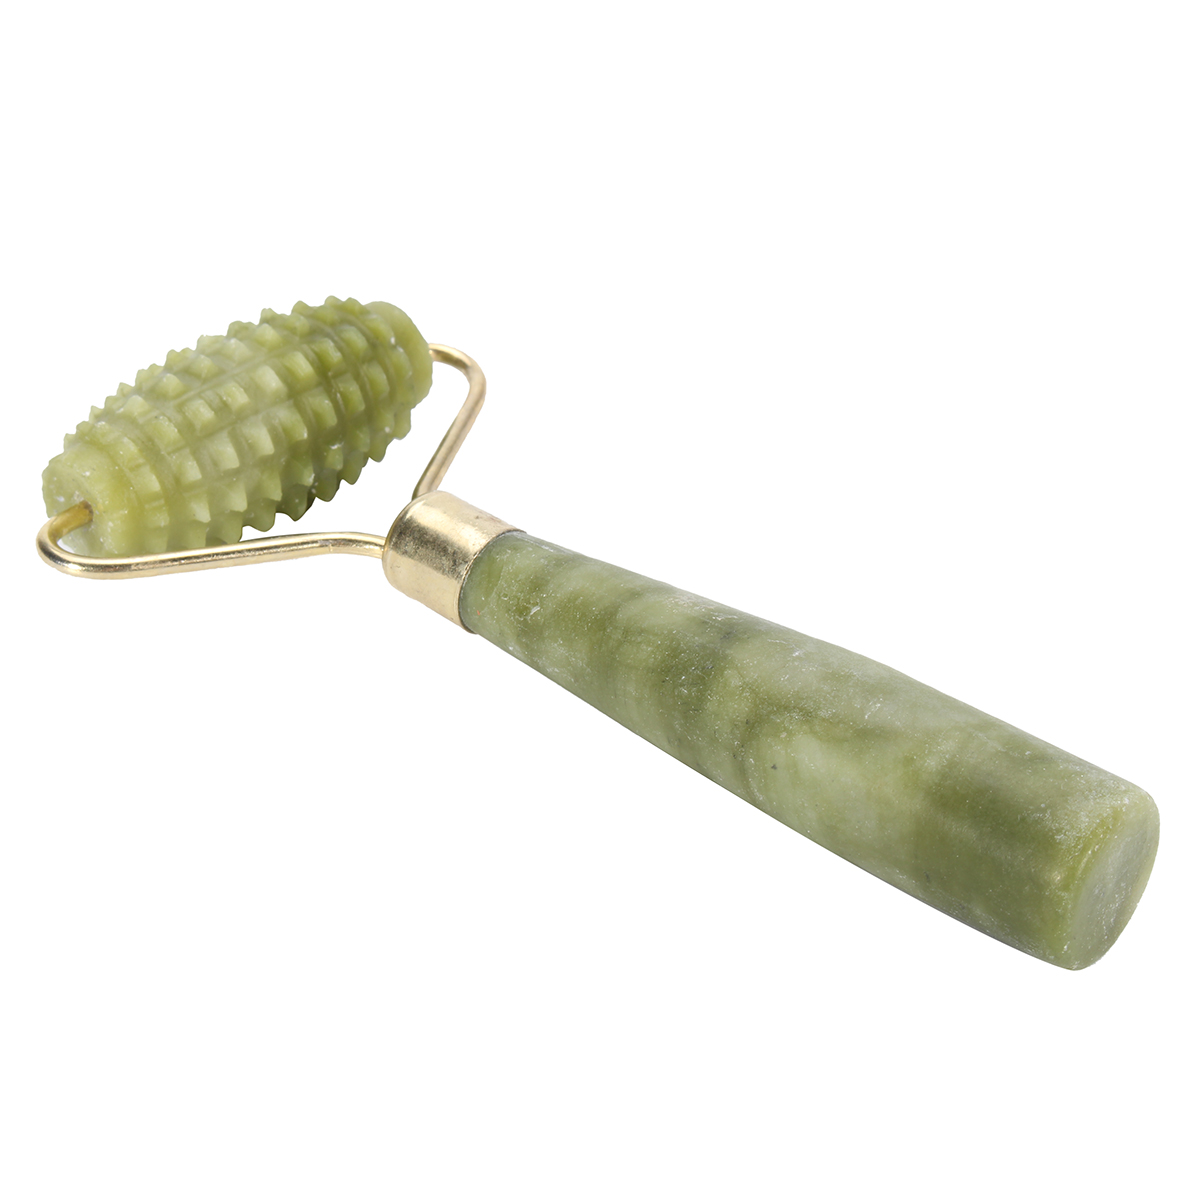 Anti-Wrinkles-Aging-Jade-Facial-Roller-Beauty-Tools-Face-Skin-Slimming-Massage-Wand-Home-1214823-4